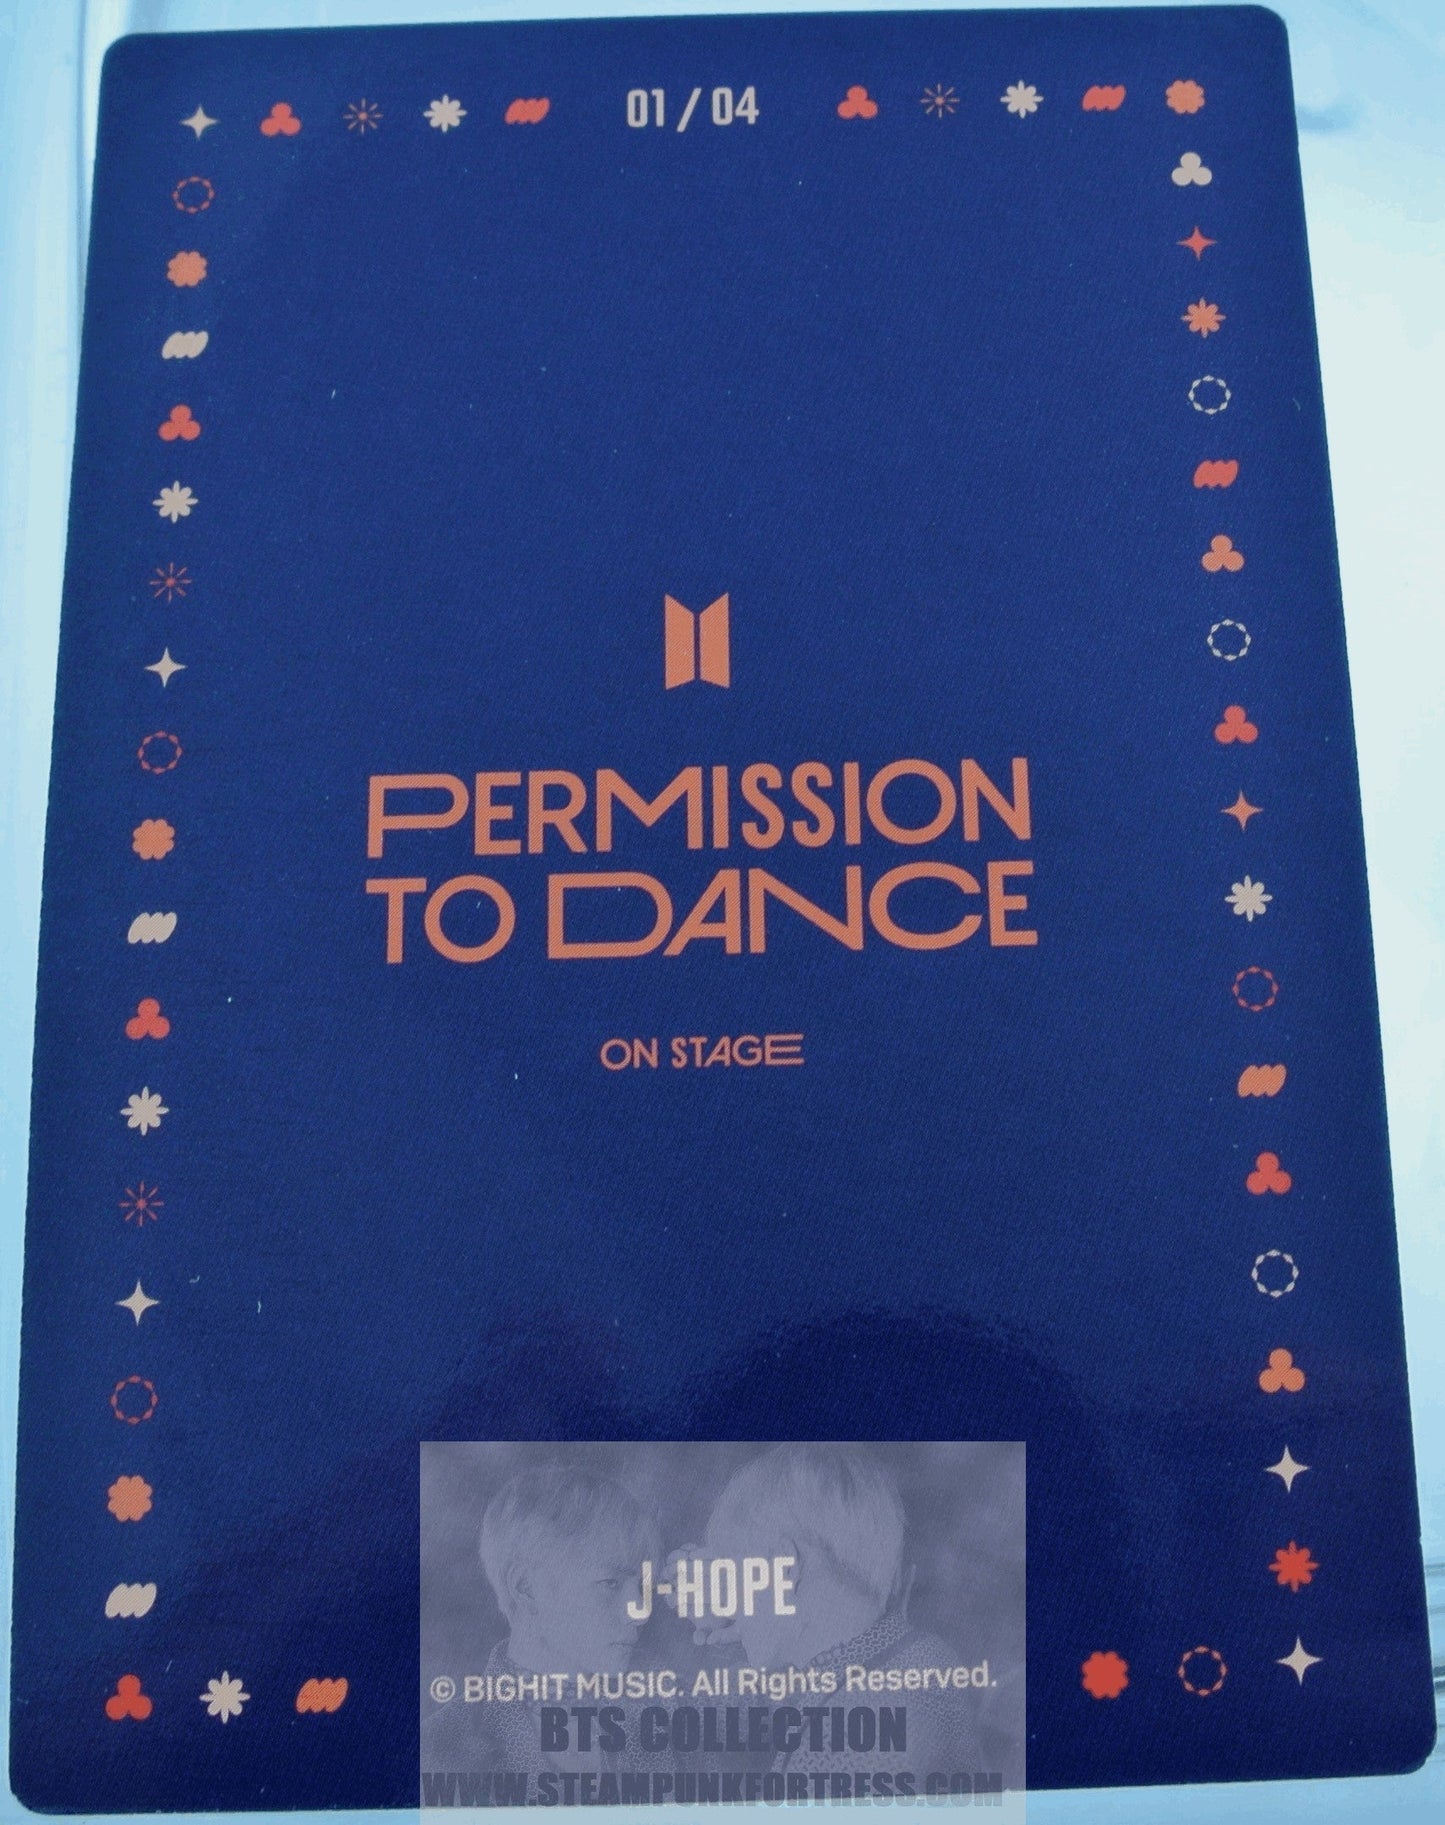 BTS J-HOPE JUNG HOSEOK HO-SEOK JHOPE 2022 PERMISSION TO DANCE ON STAGE SEOUL PTD #1 OF 4 PHOTOCARD PHOTO CARD NEW OFFICIAL MERCHANDISE